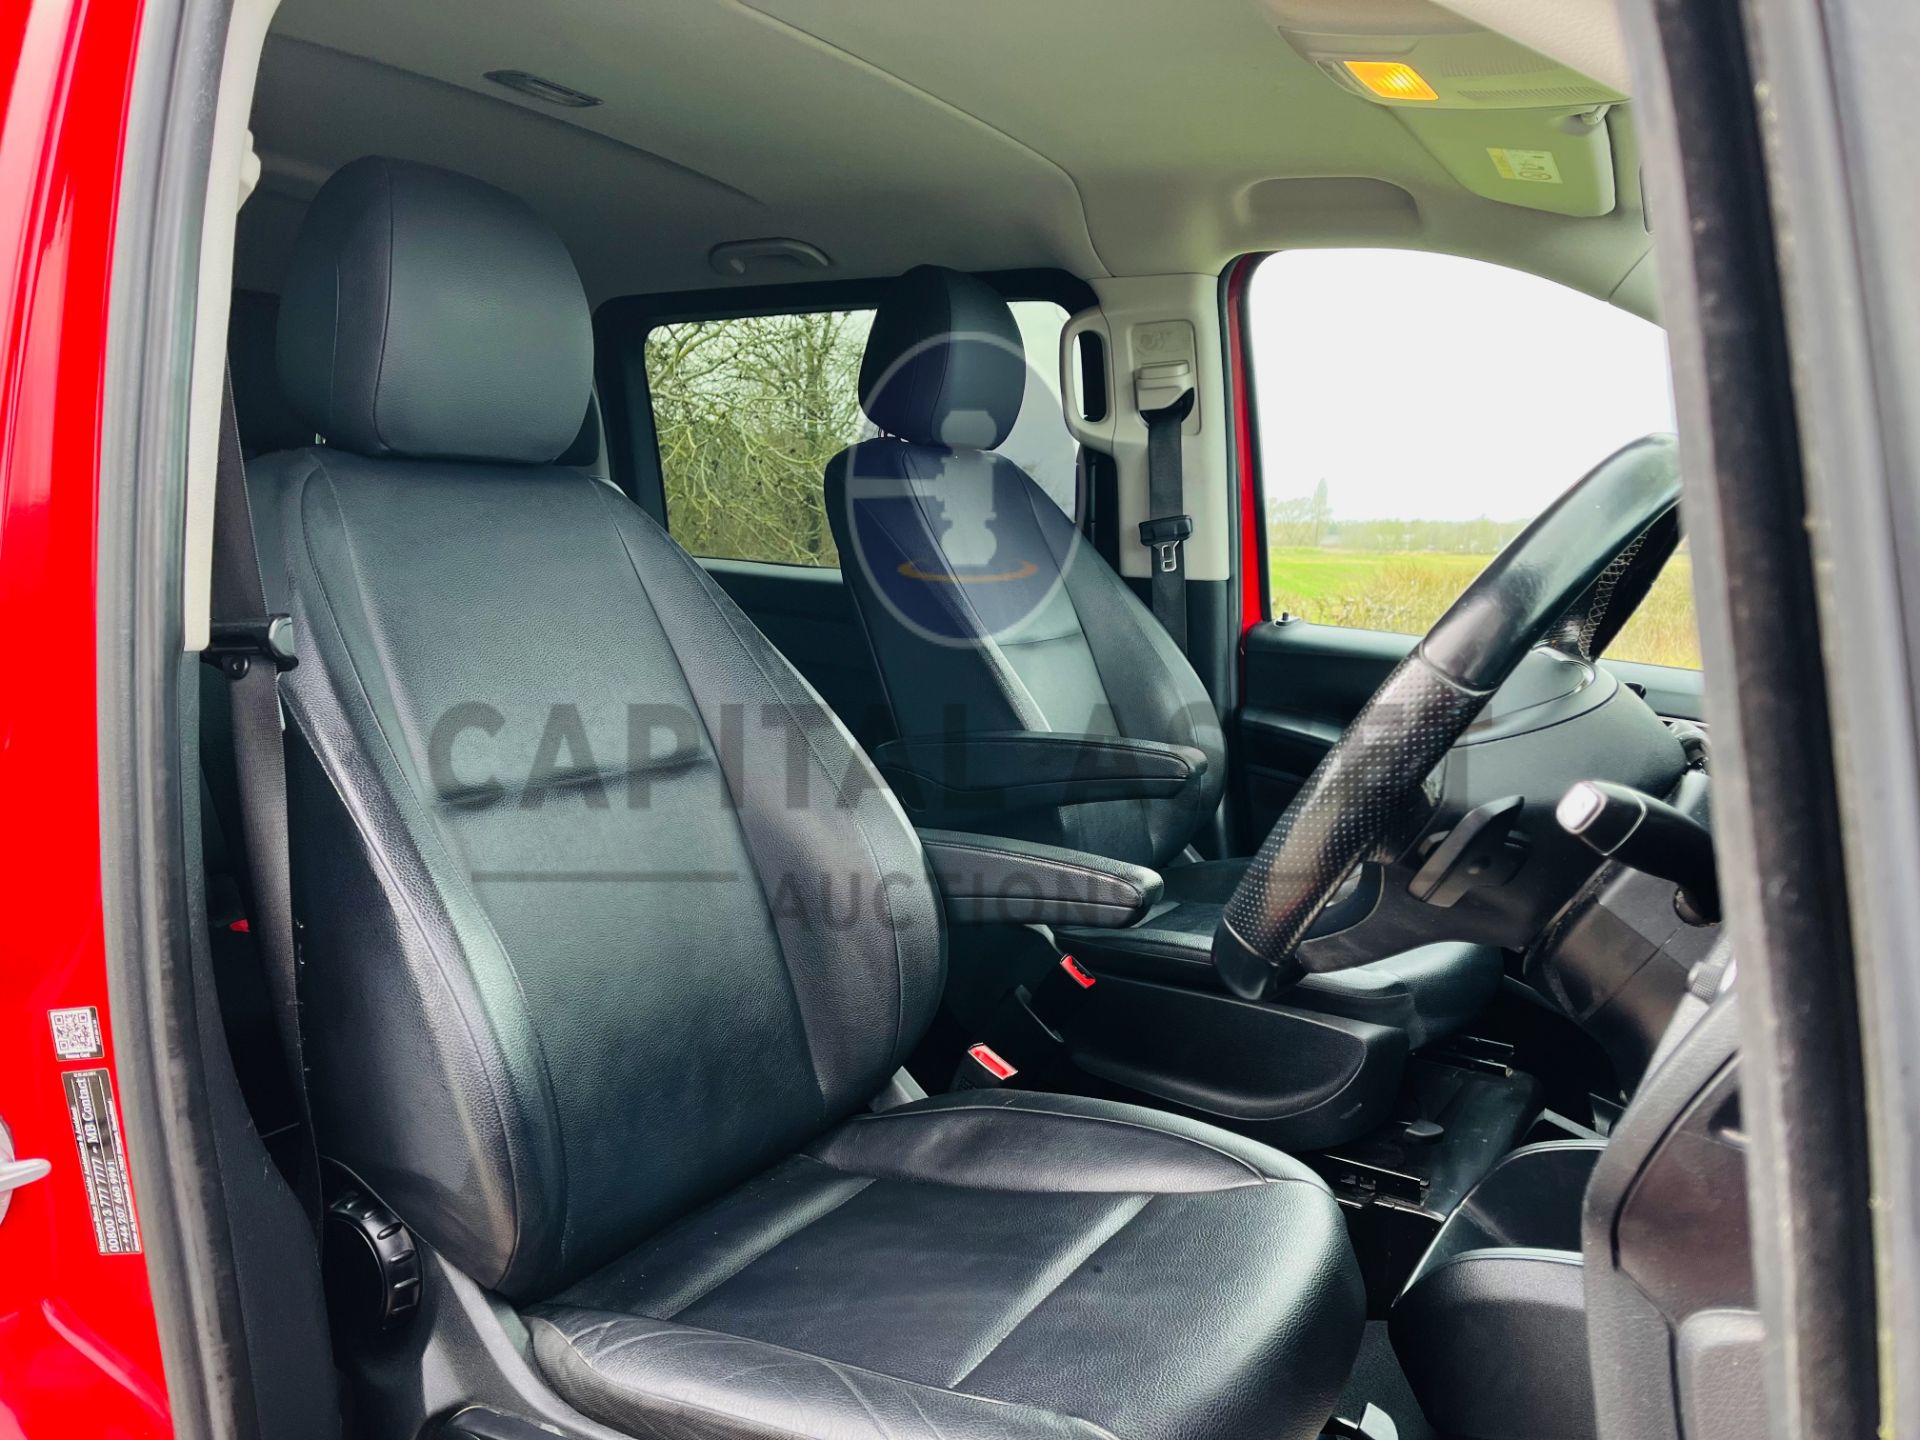 MERCEDES VITO 119CDI "SPORT" 7G-AUTO LWB DUALINER / 5 SEATER (2018 REG) ONLY 28K MILES (NO VAT) - Image 17 of 35